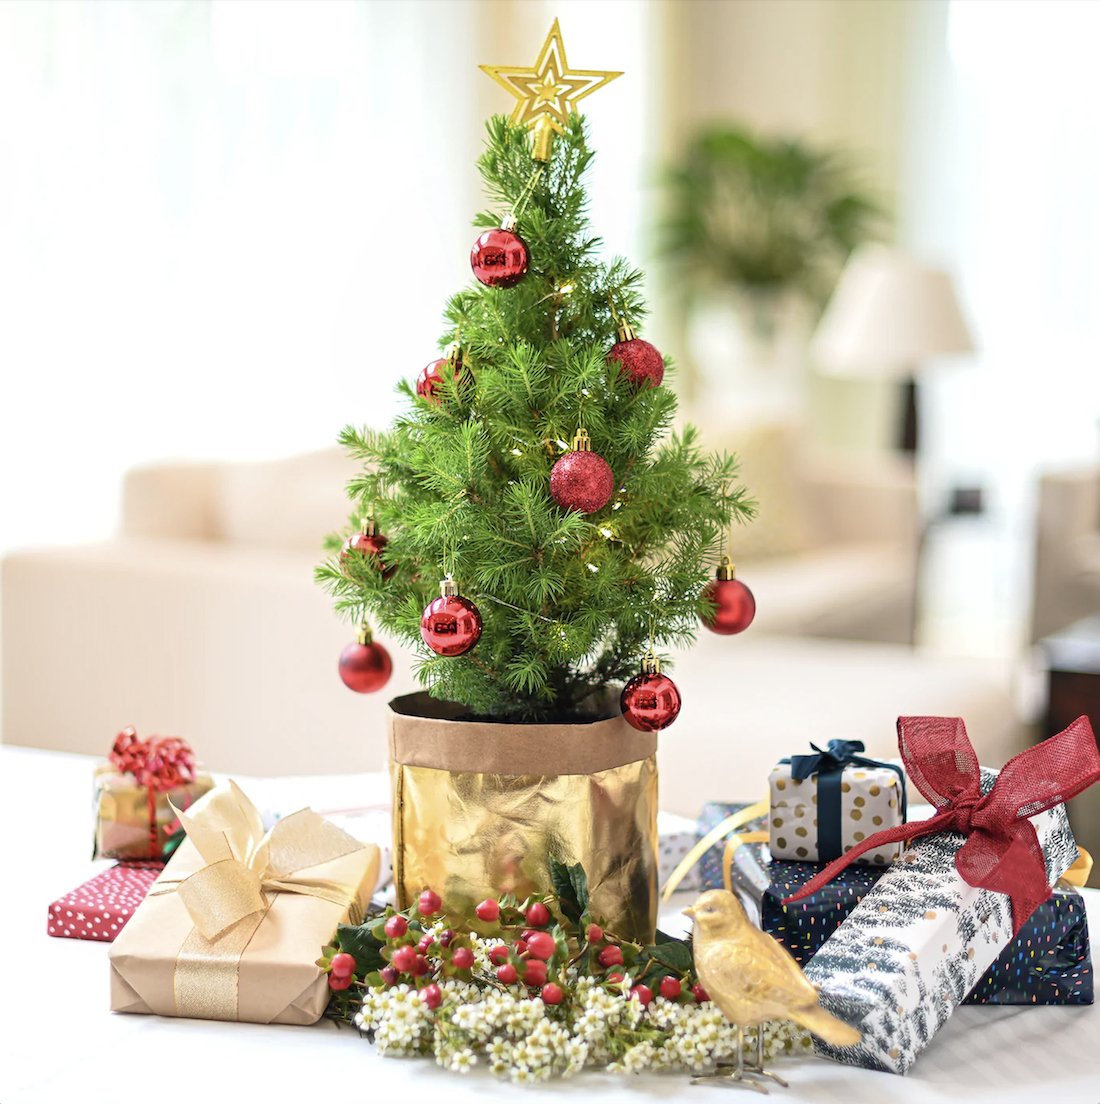 Floraly real Christmas tree is another best selling Christmas trees